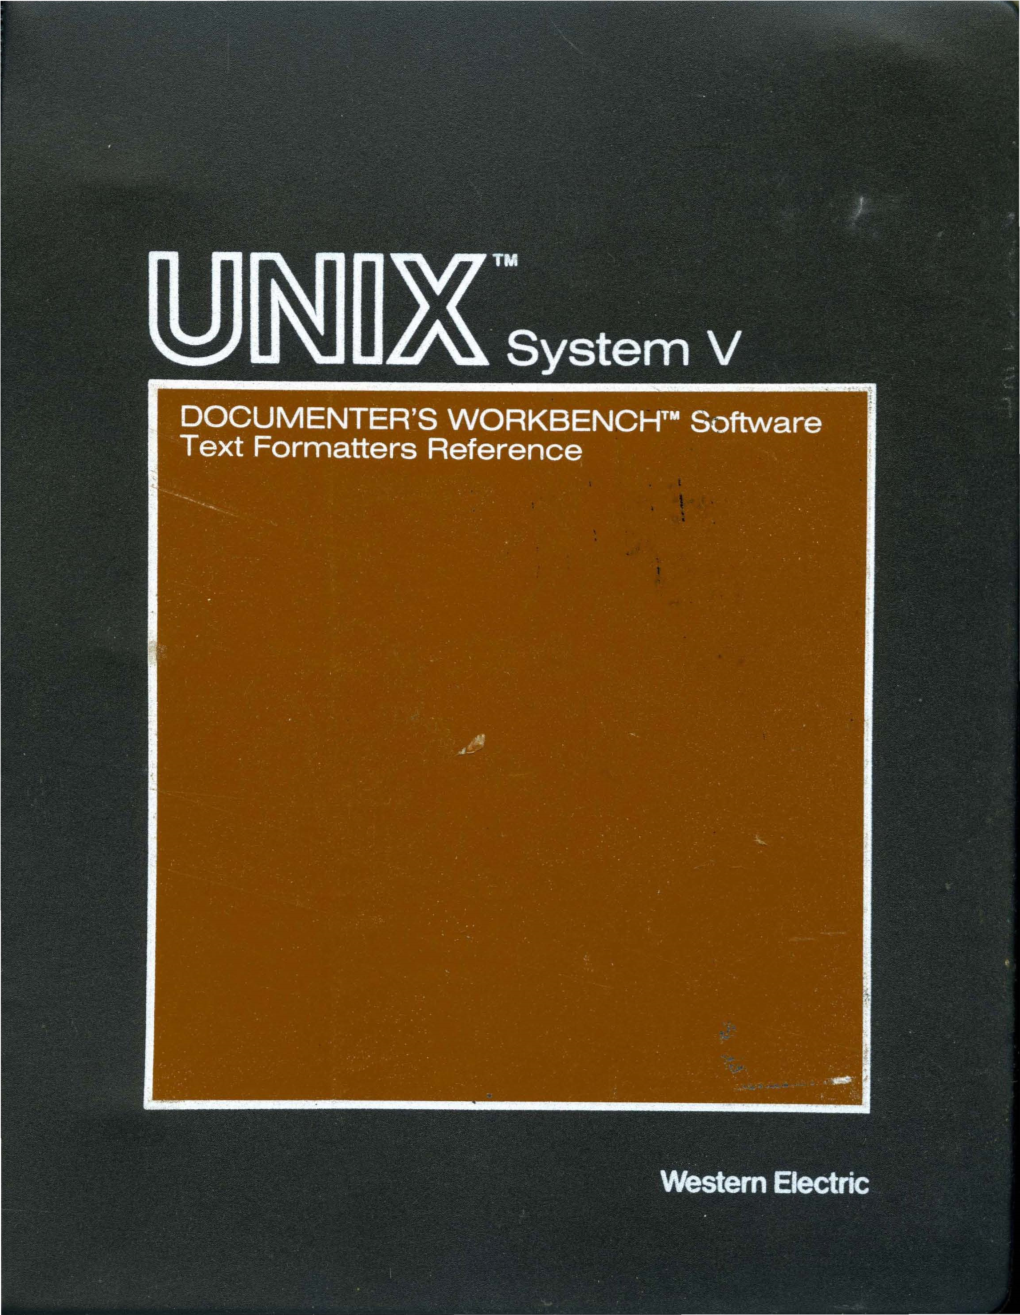 307-151 Issue 1 N N~Nnwtsystem V ~ U~ U~ Release 2.0 DOCUMENTER's WORKBENCH™ Software 'Text Formatters Reference